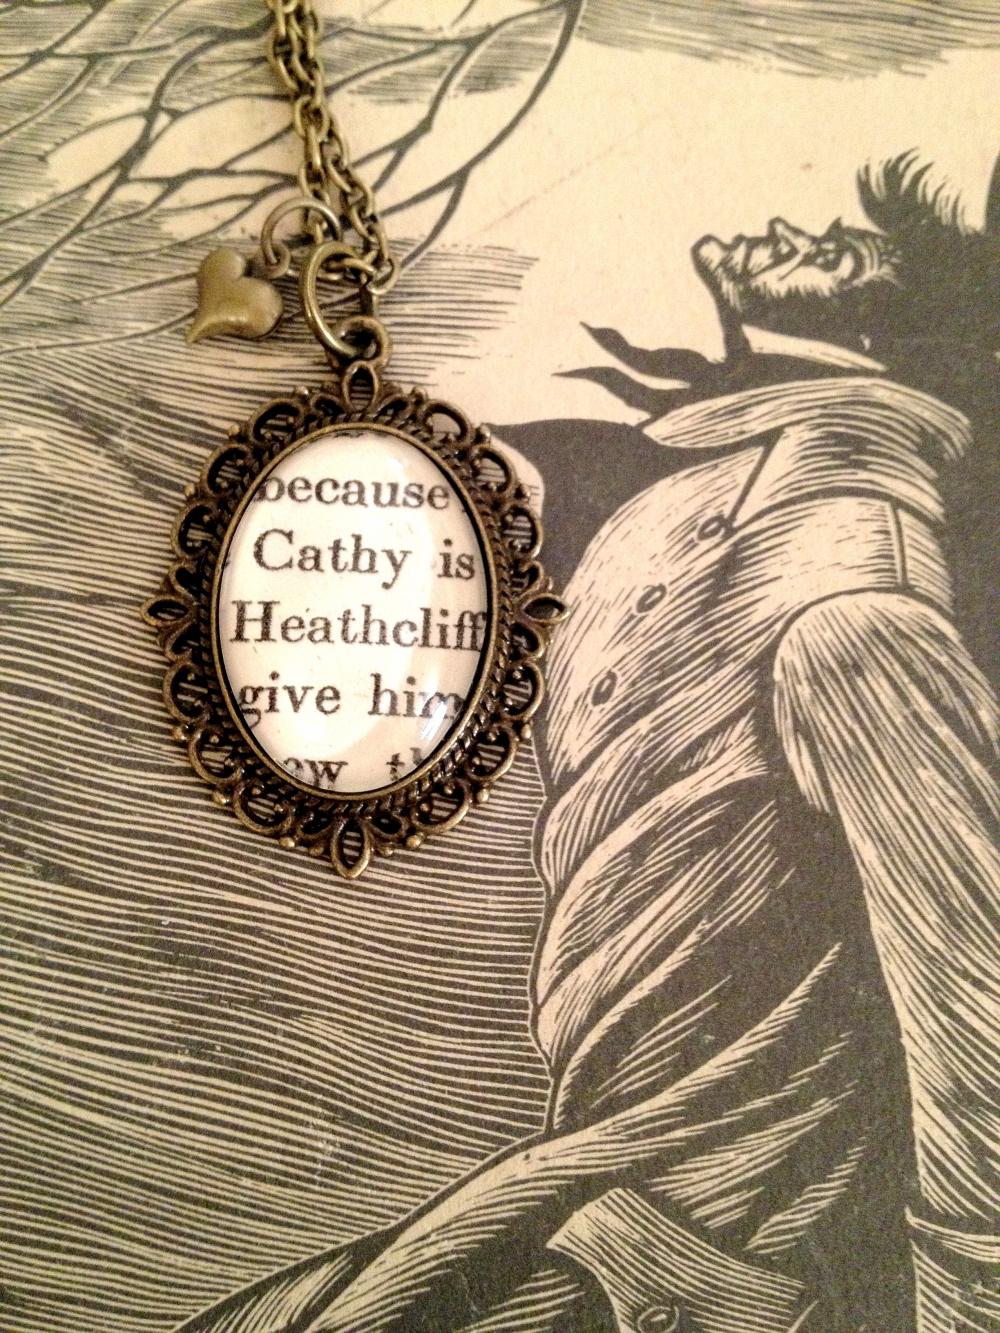 Cathy And Heathcliff From Wuthering Heights Bronze Book Necklace`